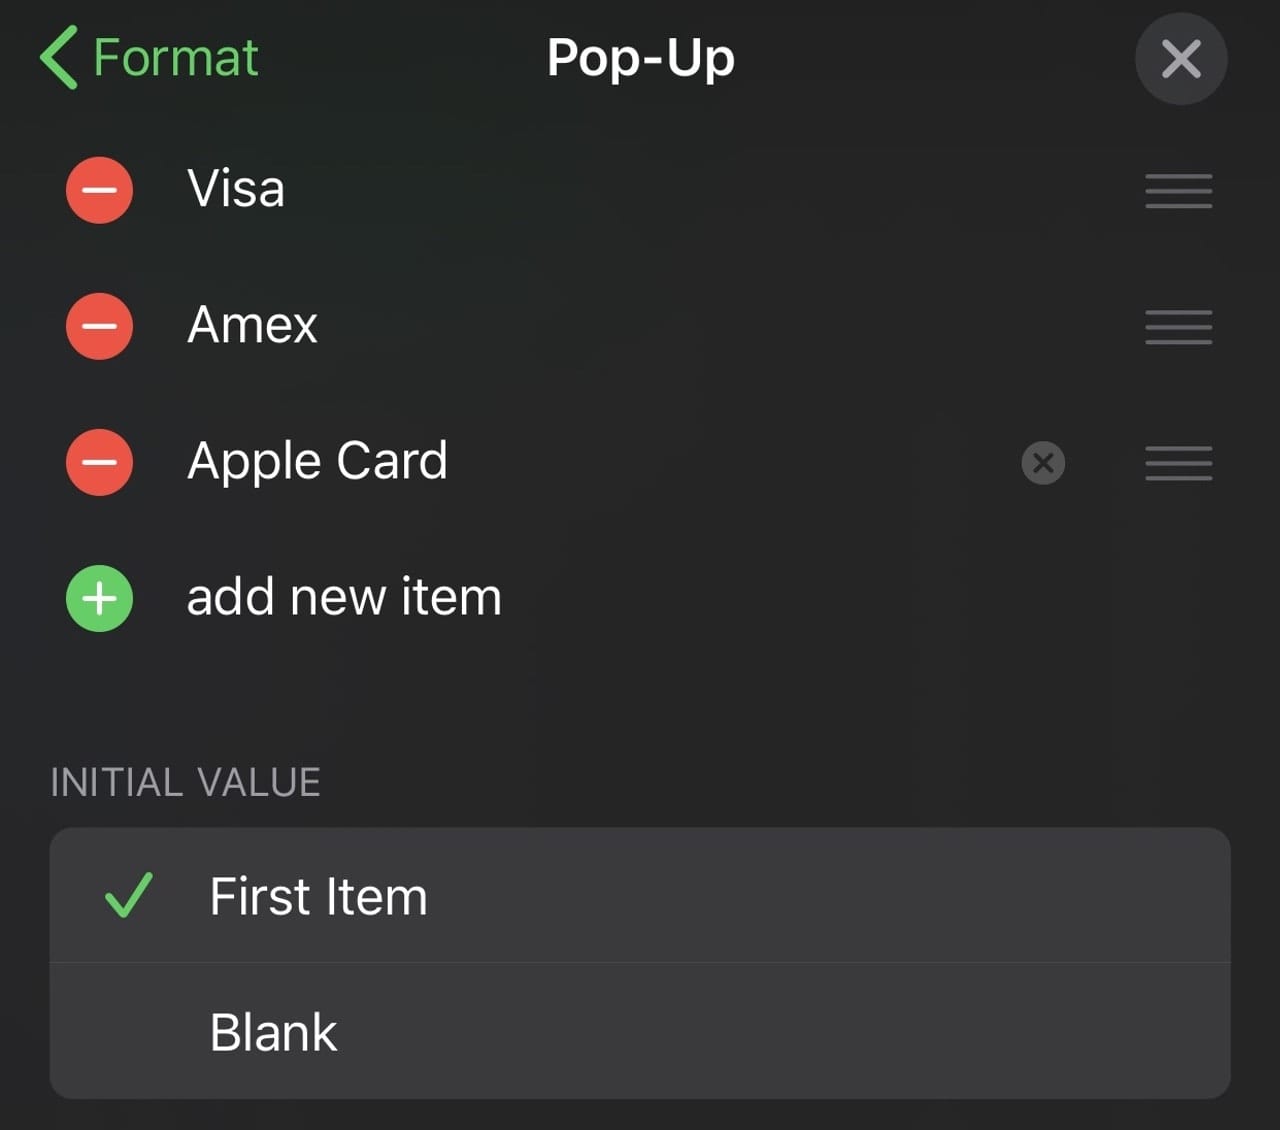 Creating the pop-up menu for "Card Used"